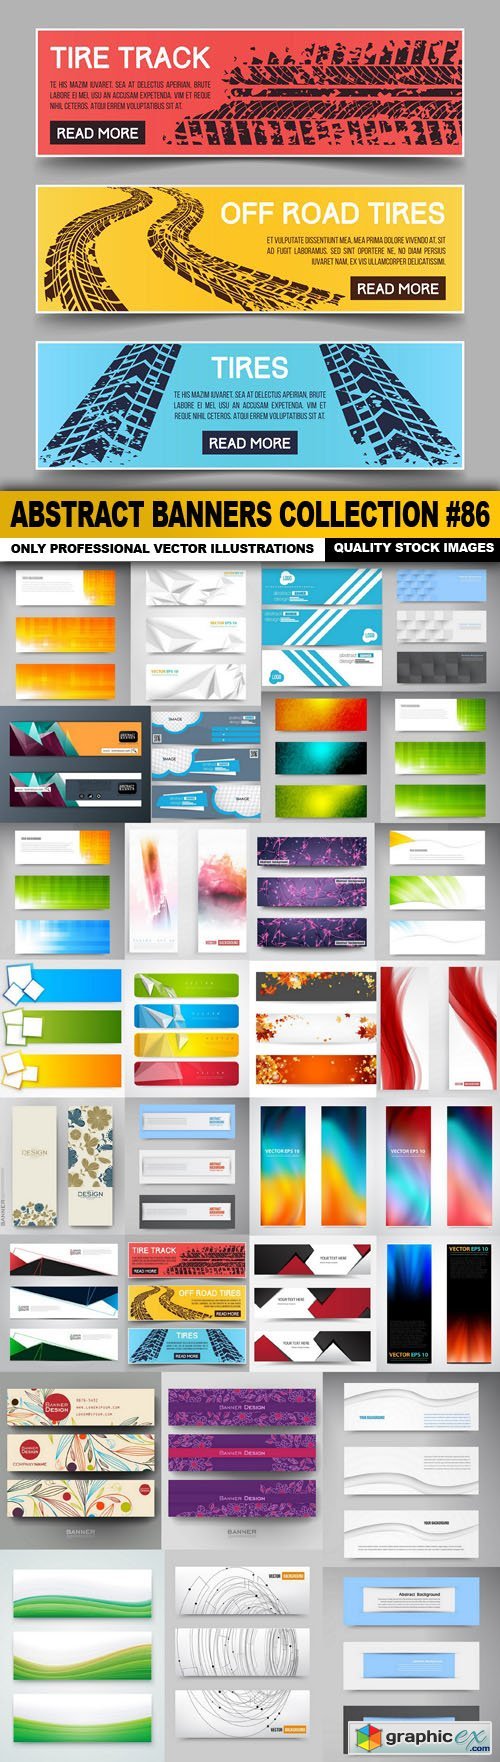 Abstract Banners Collection #86 - 30 Vectors